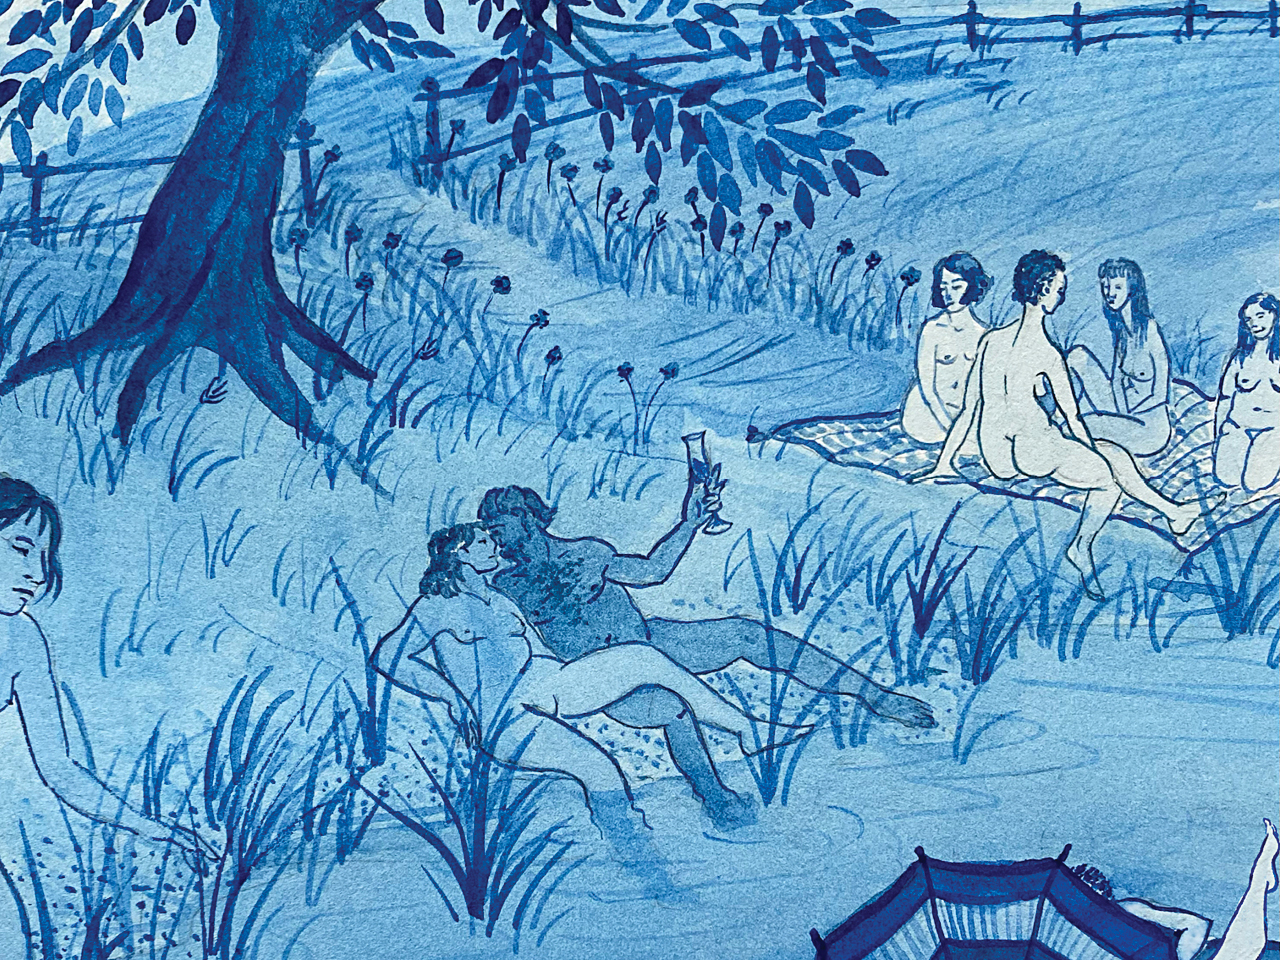 An illustration of a couple frolicking nude in a field next to a group of other nude people.